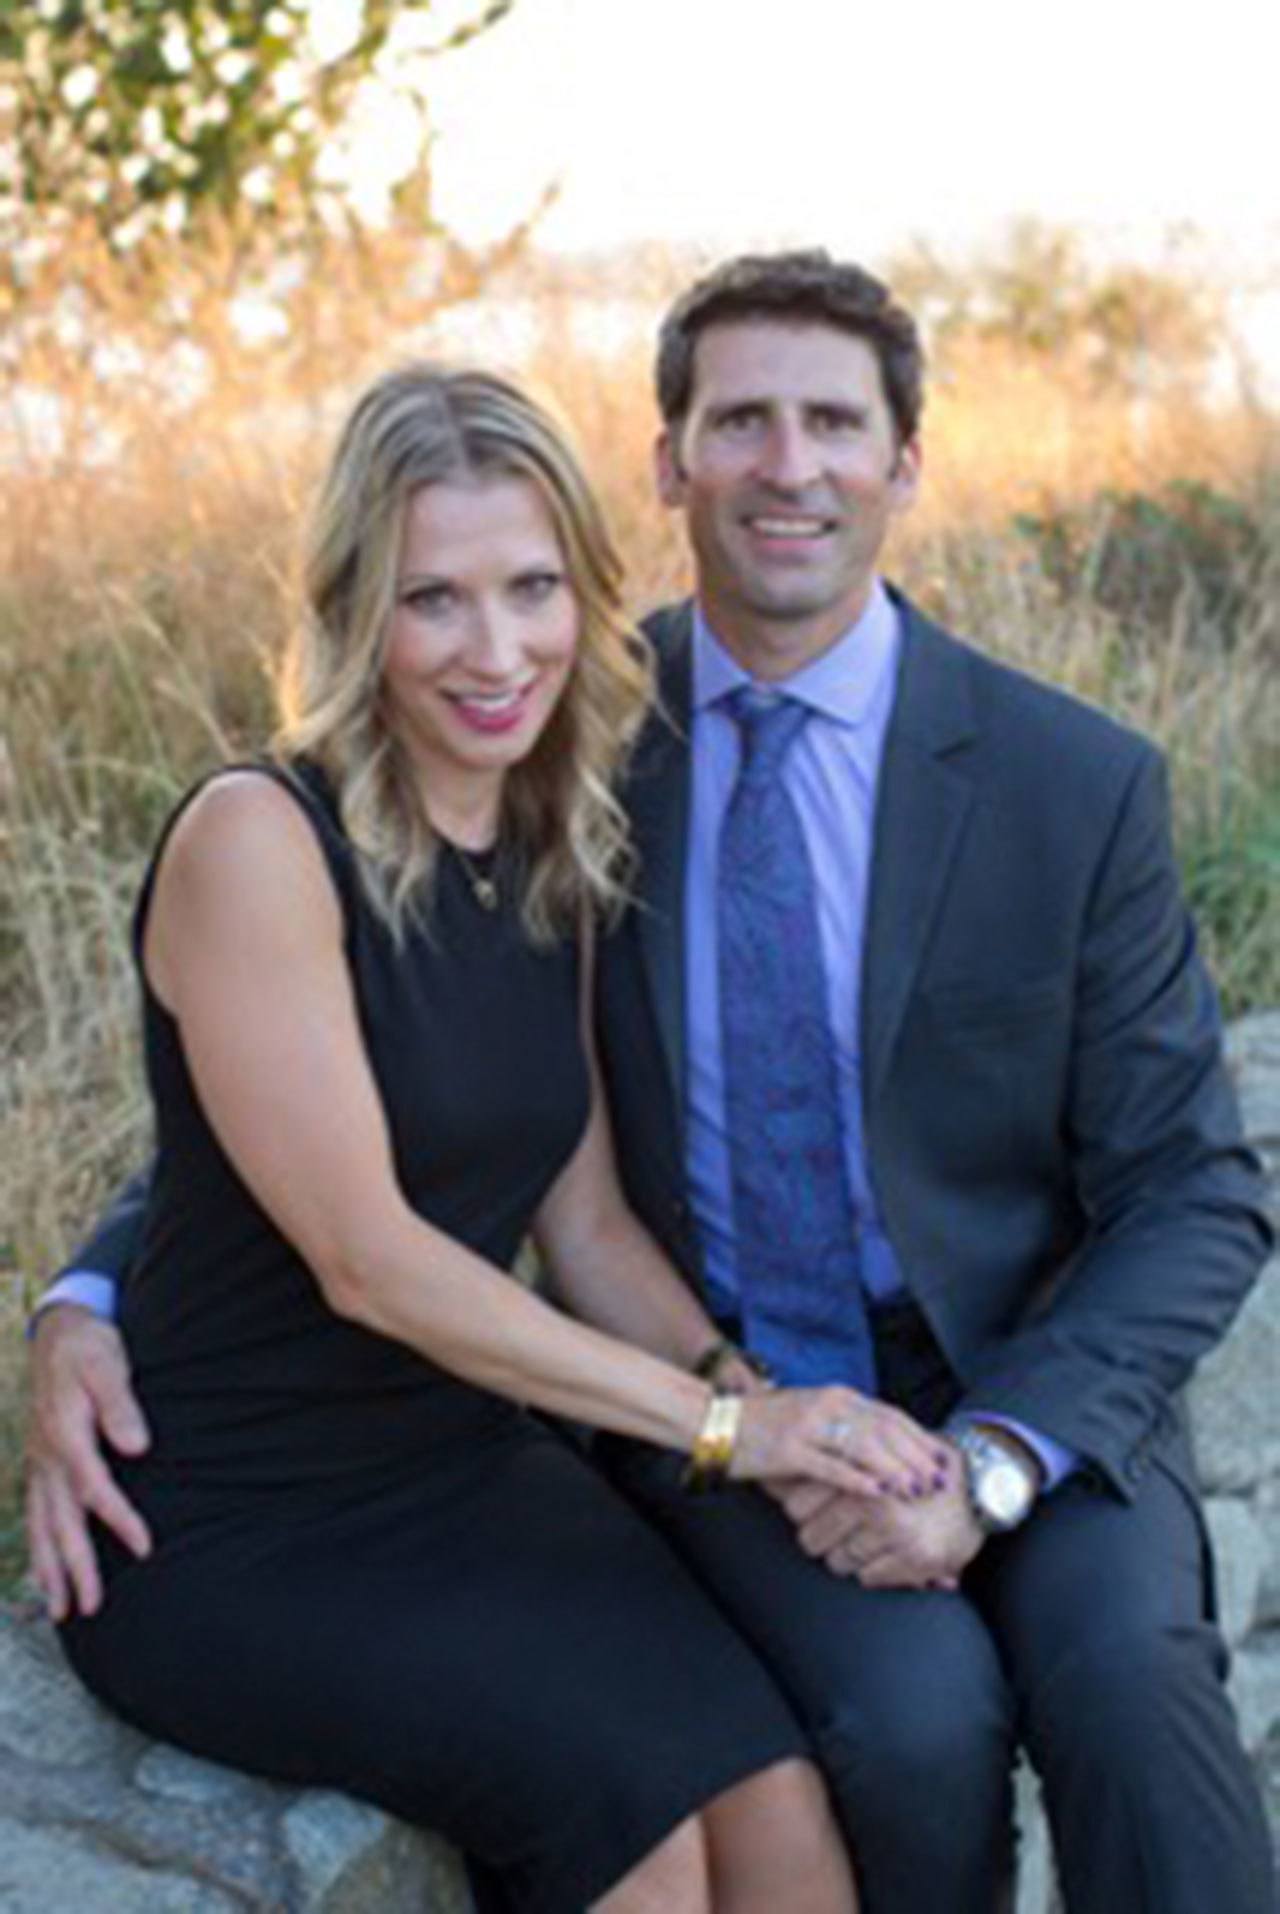 Leah and Jeremy Meadows are celebrating 16 years of marriage and 16 years of Meadows Family Chiropractic this year. Contributed photo